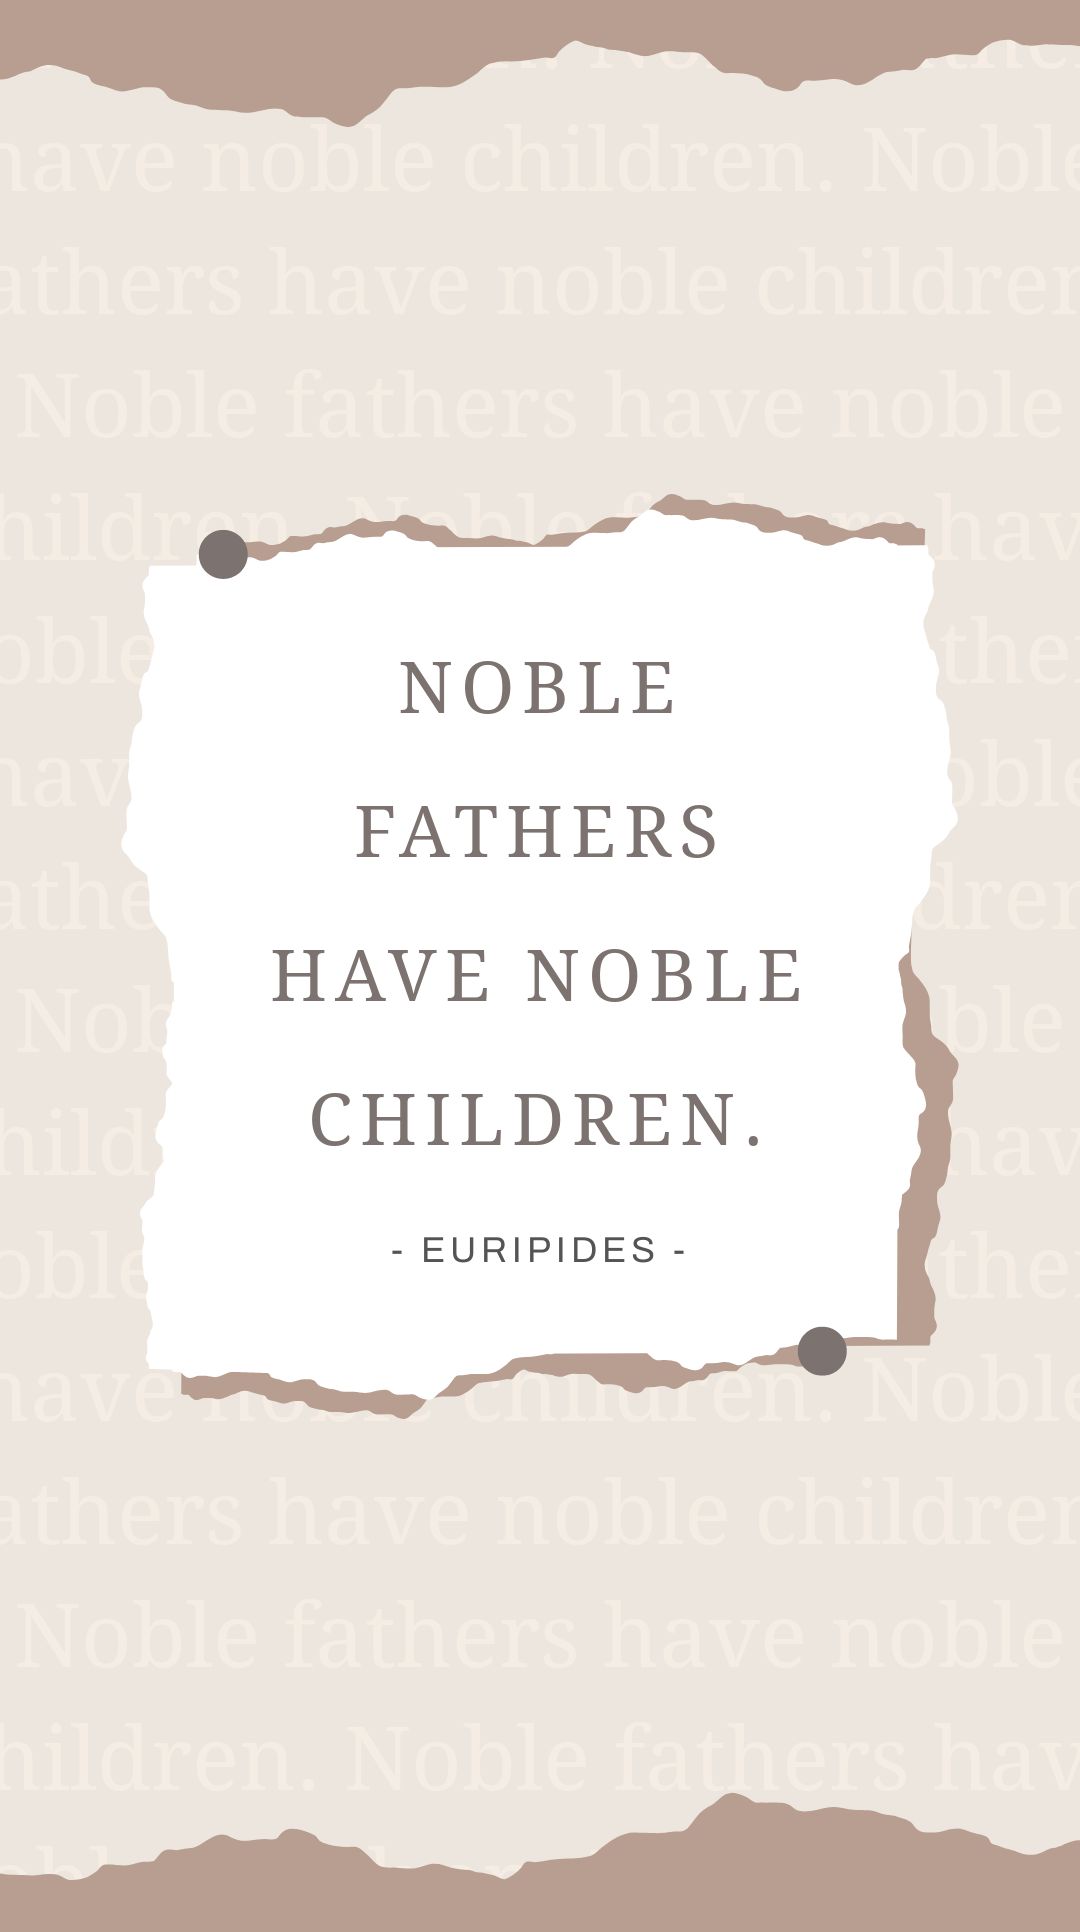 Euripides - Noble fathers have noble children.